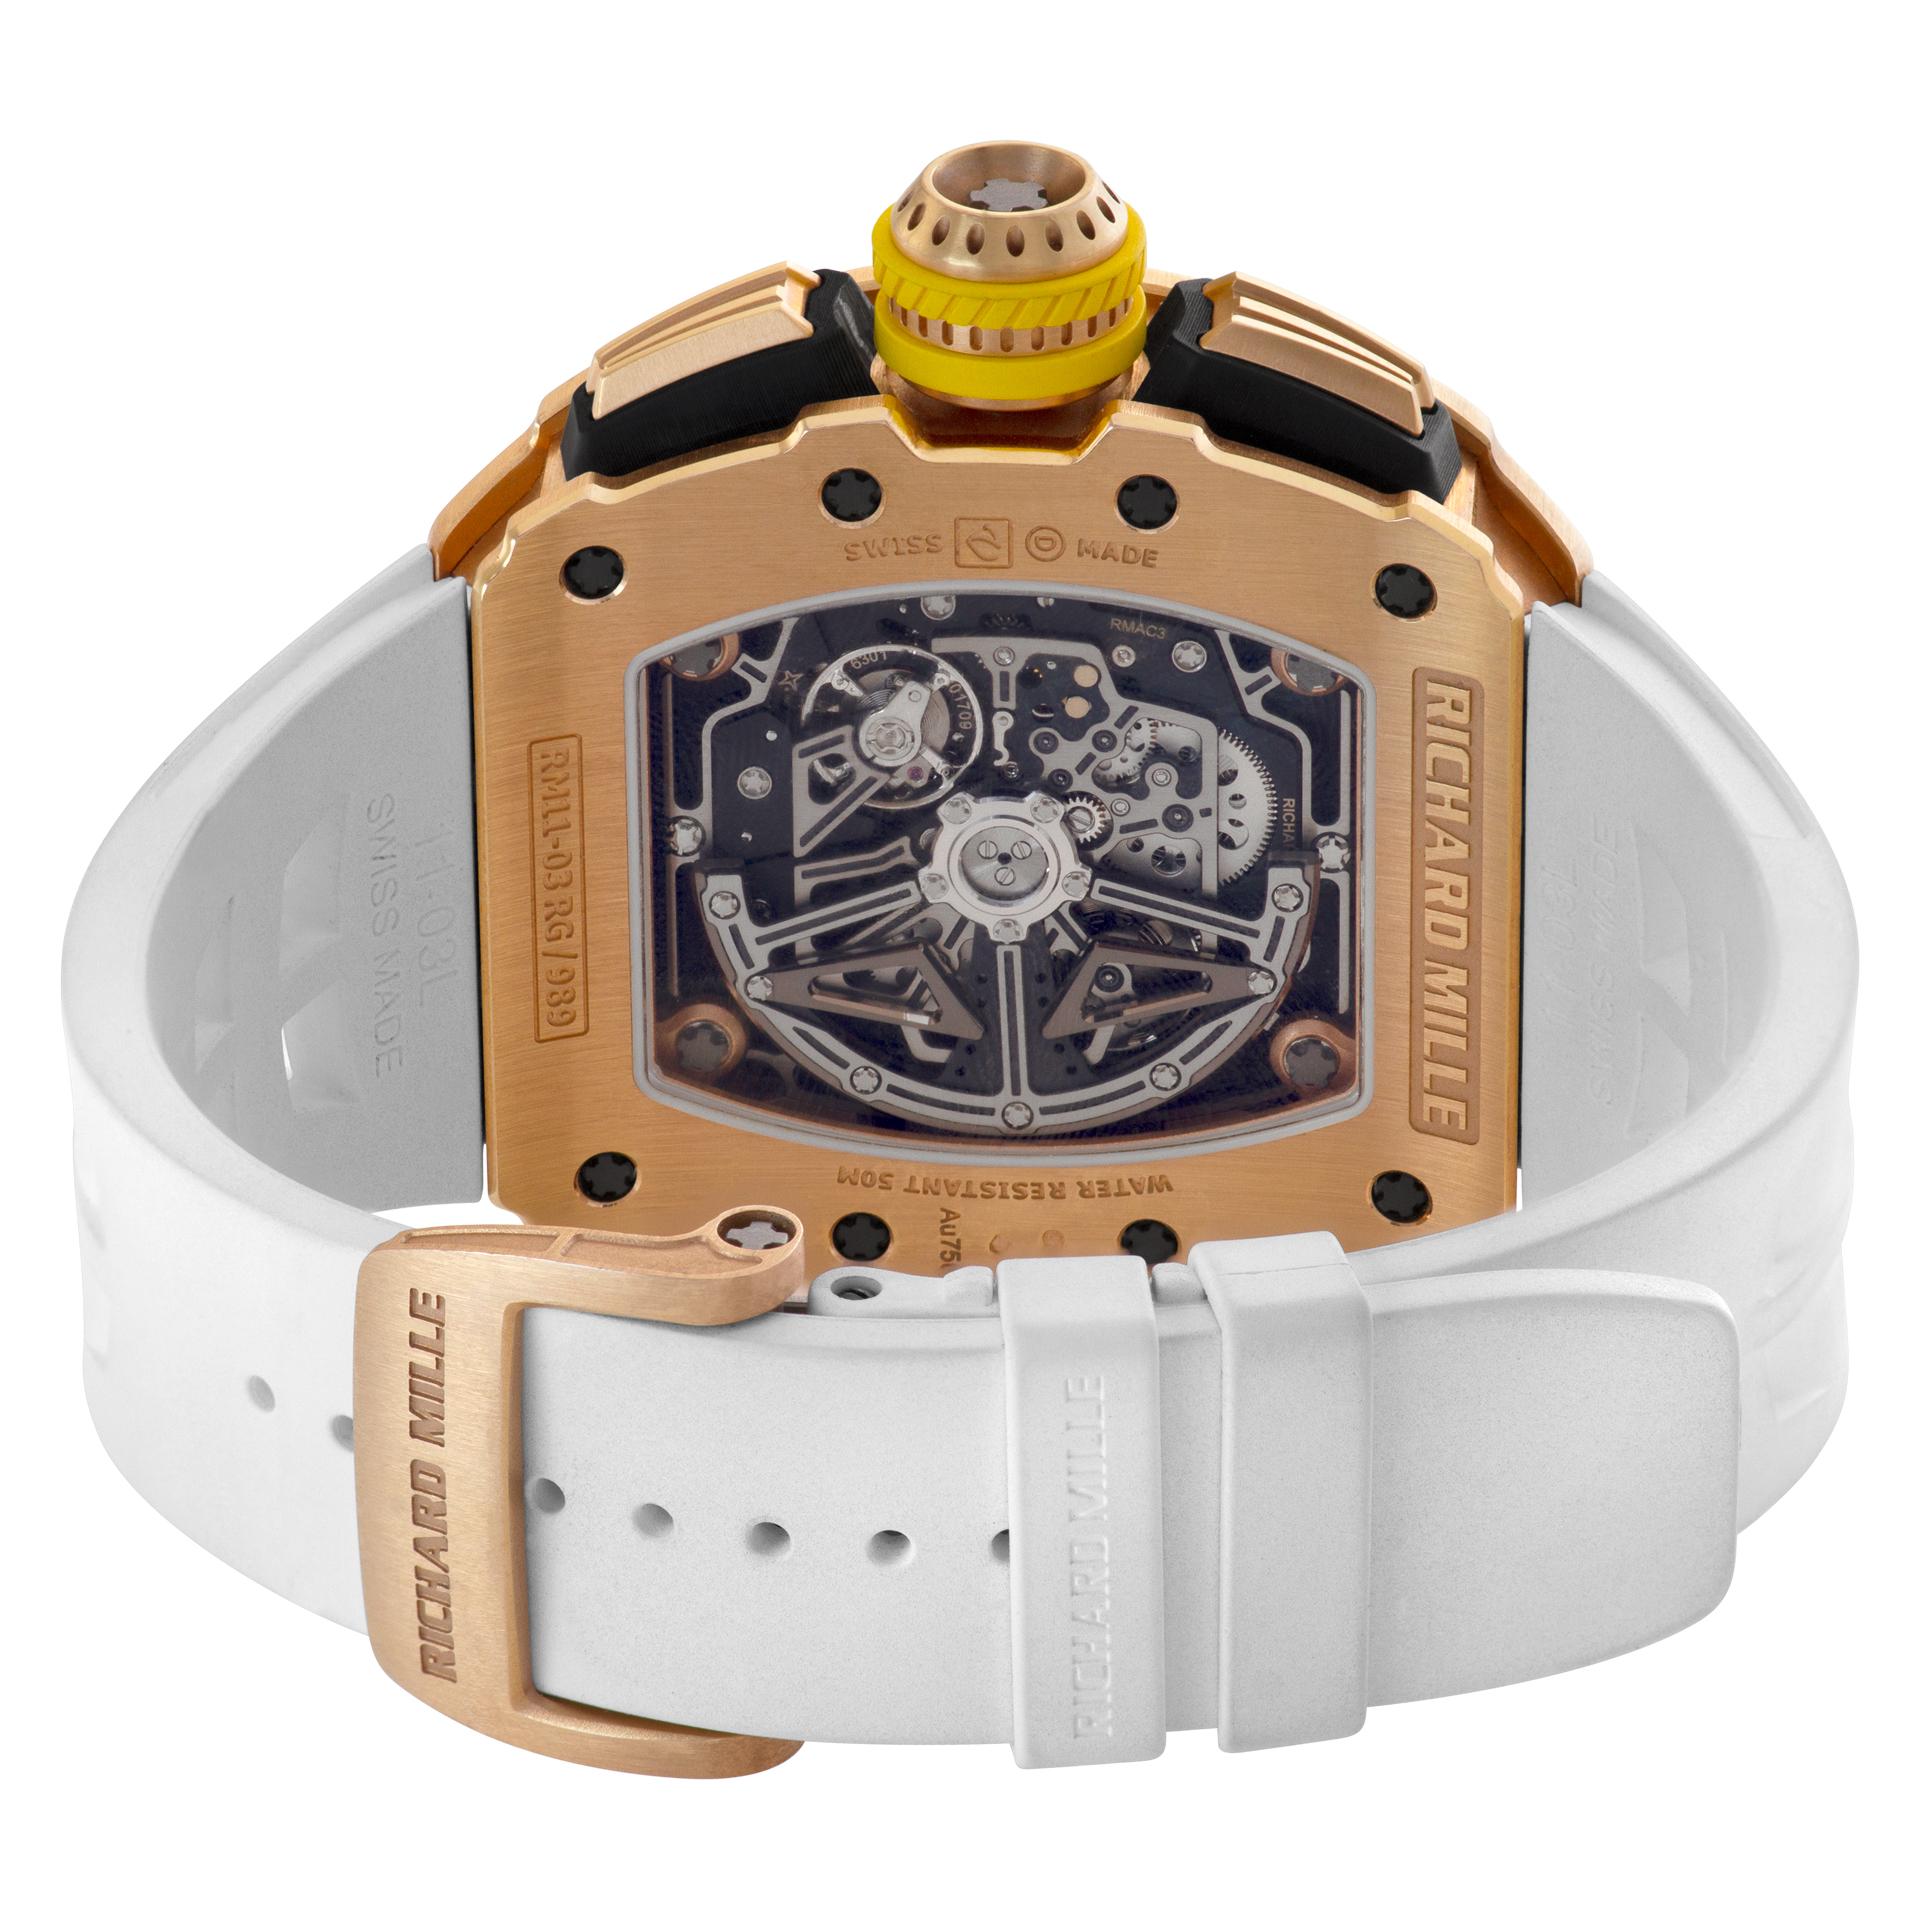 Richard Mille Flyback Chronograph 18k gold Automatic Wristwatch Ref RM11-03 RG For Sale 2